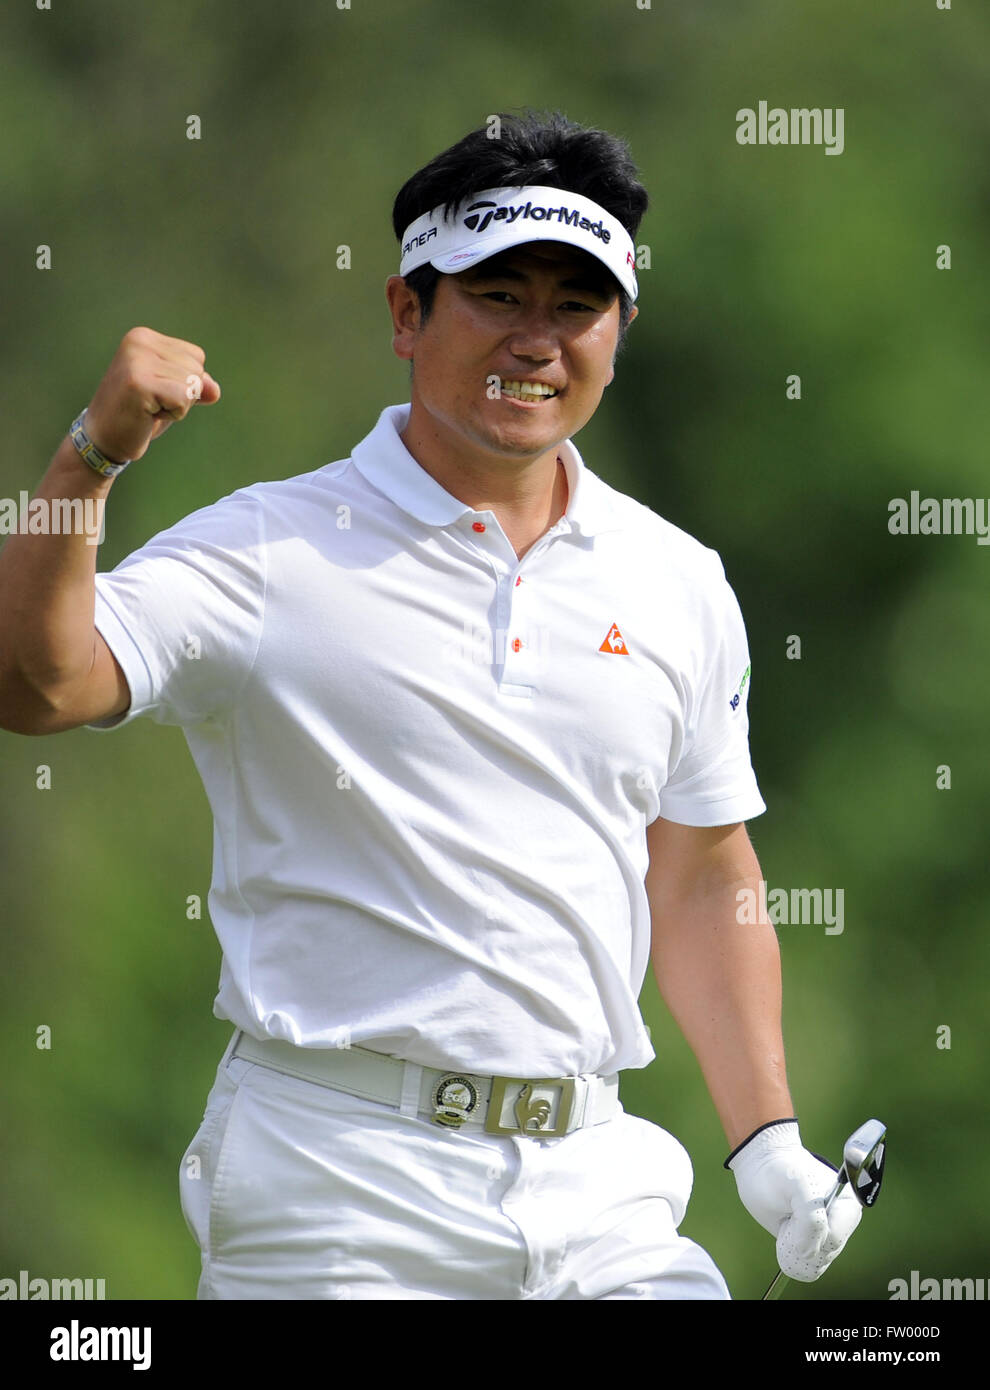 August 16, 2009 - Chaska, MN, UNITED STATES - Y.E. Yang of Korea celebrates after an eagle on the 14th hole during the final round of the 2009 PGA Championship at Hazeltine National Golf Club on Aug 16, 2009 in Chaska, MN...ZUMA Press/Scott A. Miller (Credit Image: © Scott A. Miller via ZUMA Wire) Stock Photo